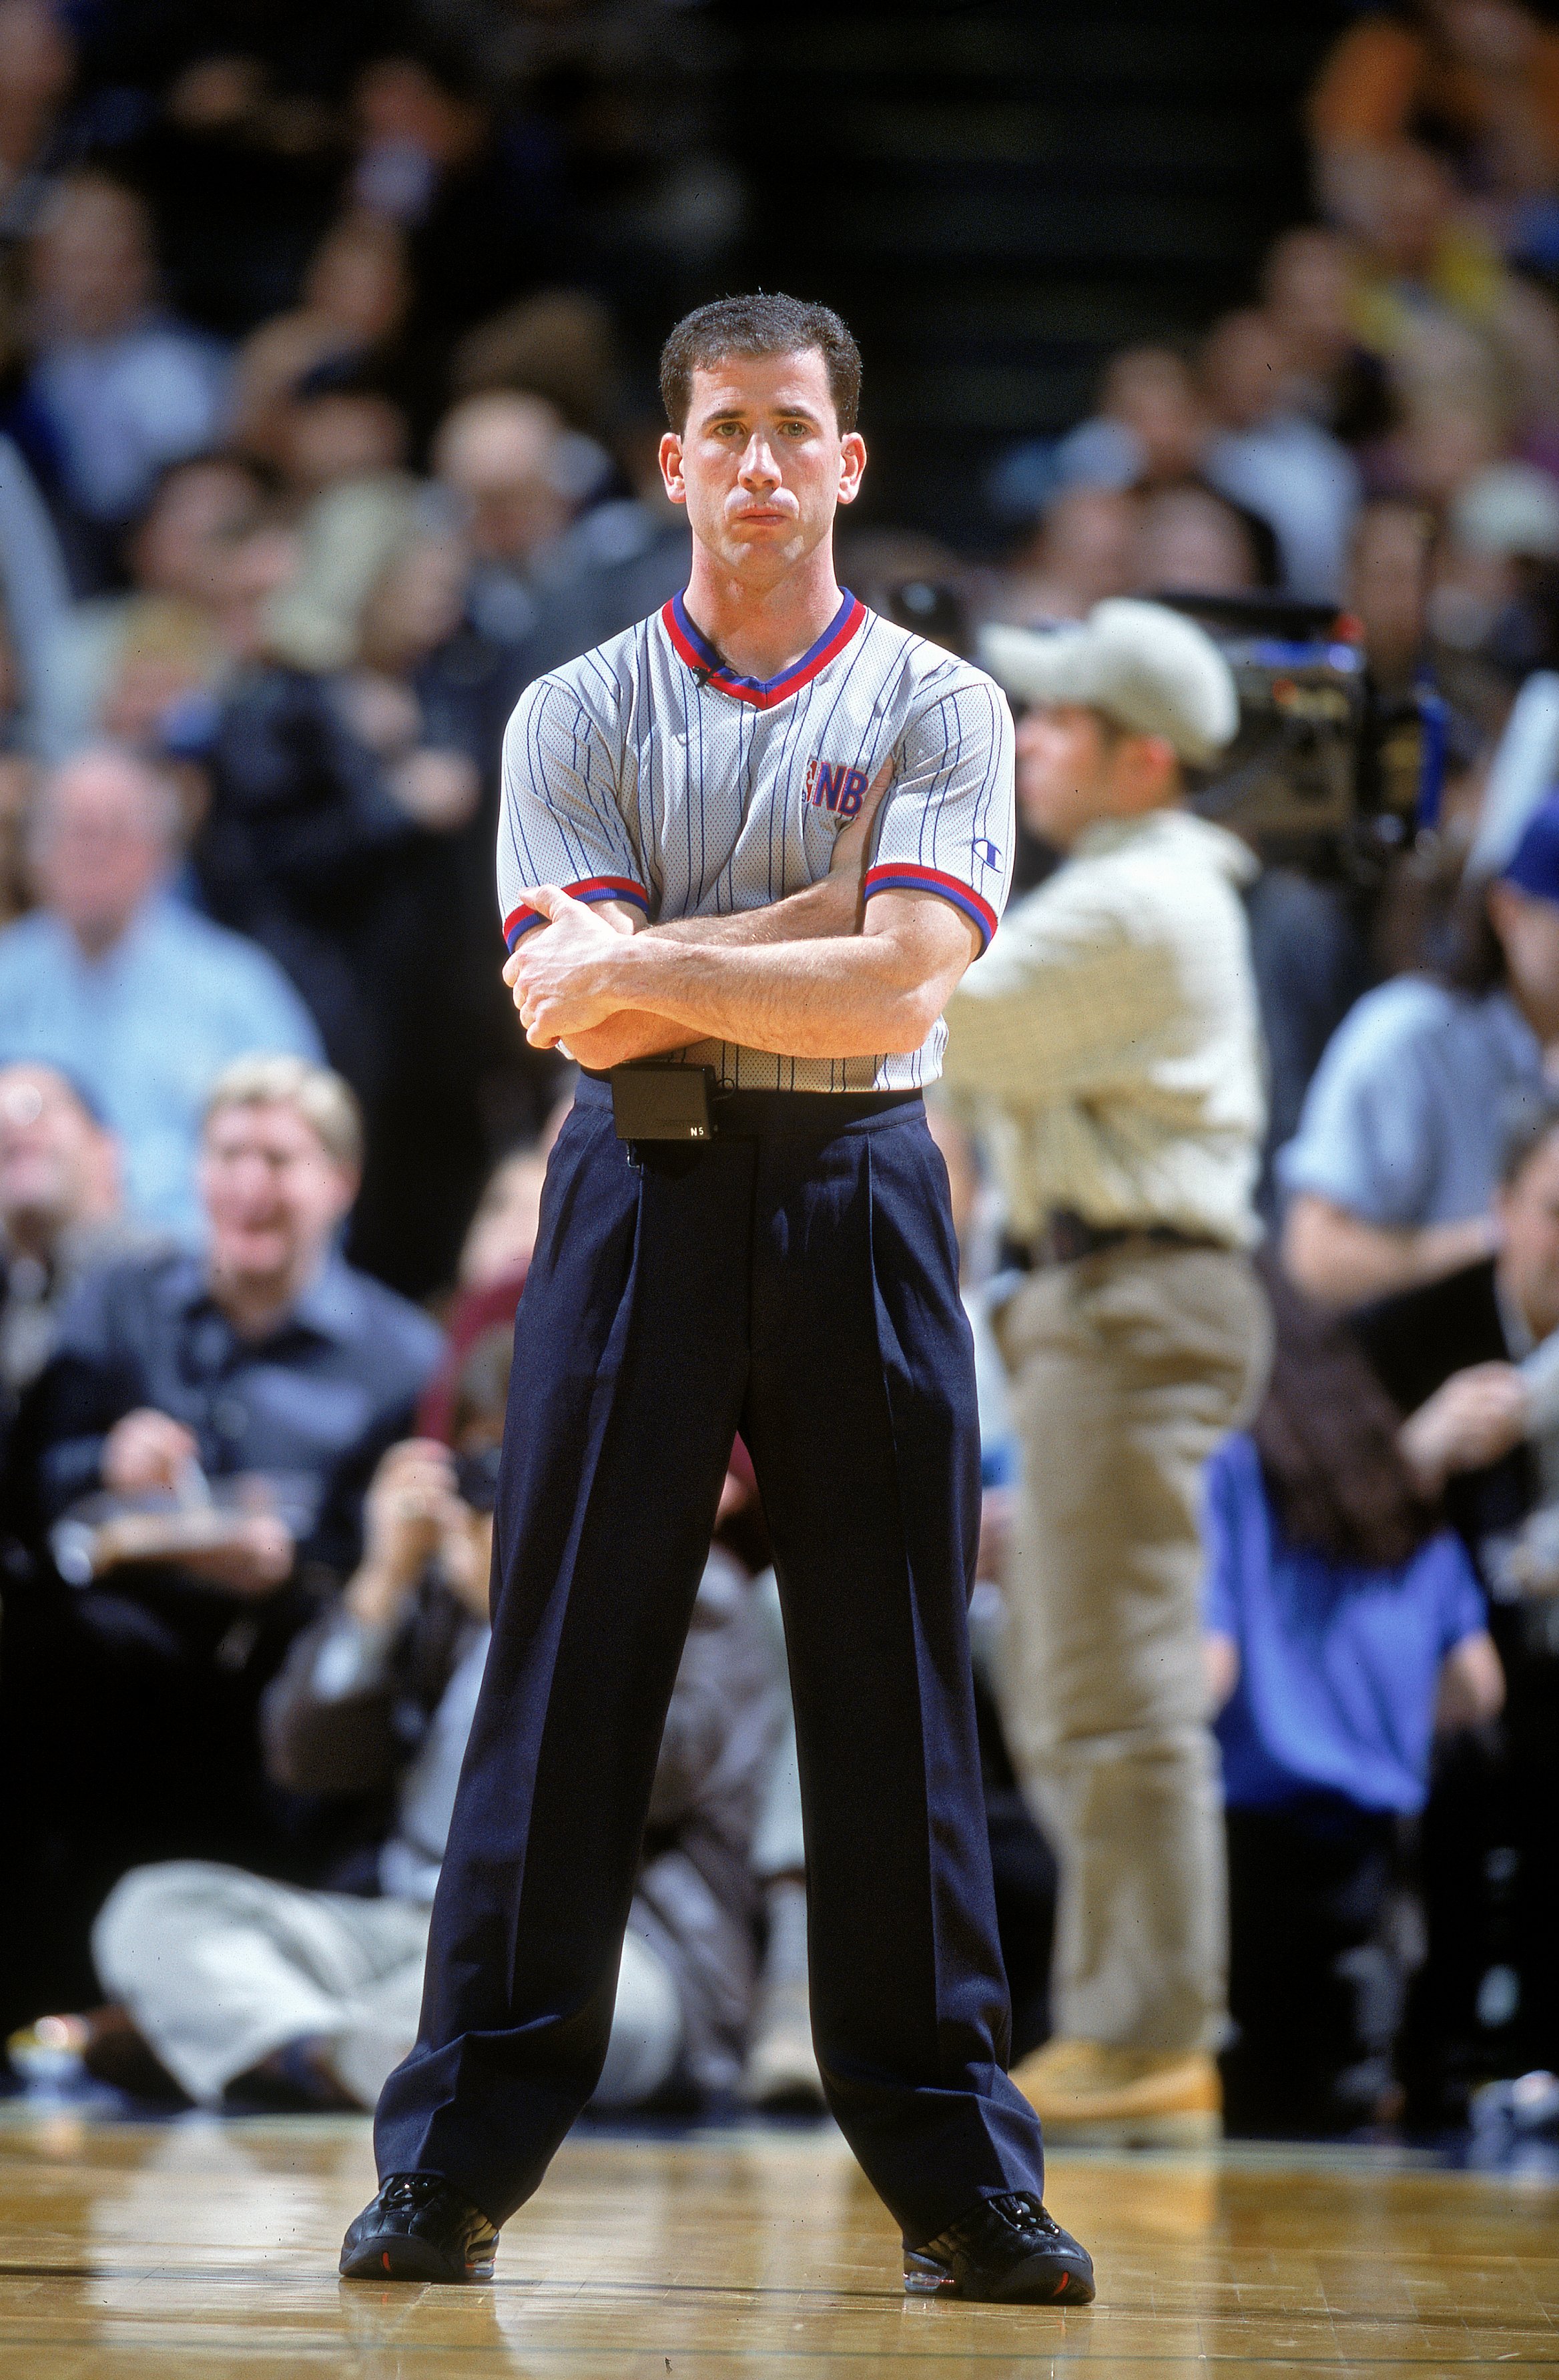 6 Dec 2000:  Referee Tim Donaghy  stands on the court during the game between the New York Knicks and the Dallas Mavericks at the Reunion Arena in Dallas, Texas. The Mavericks defeated the Knicks 94-85.   NOTE TO USER: It is expressly understood that the